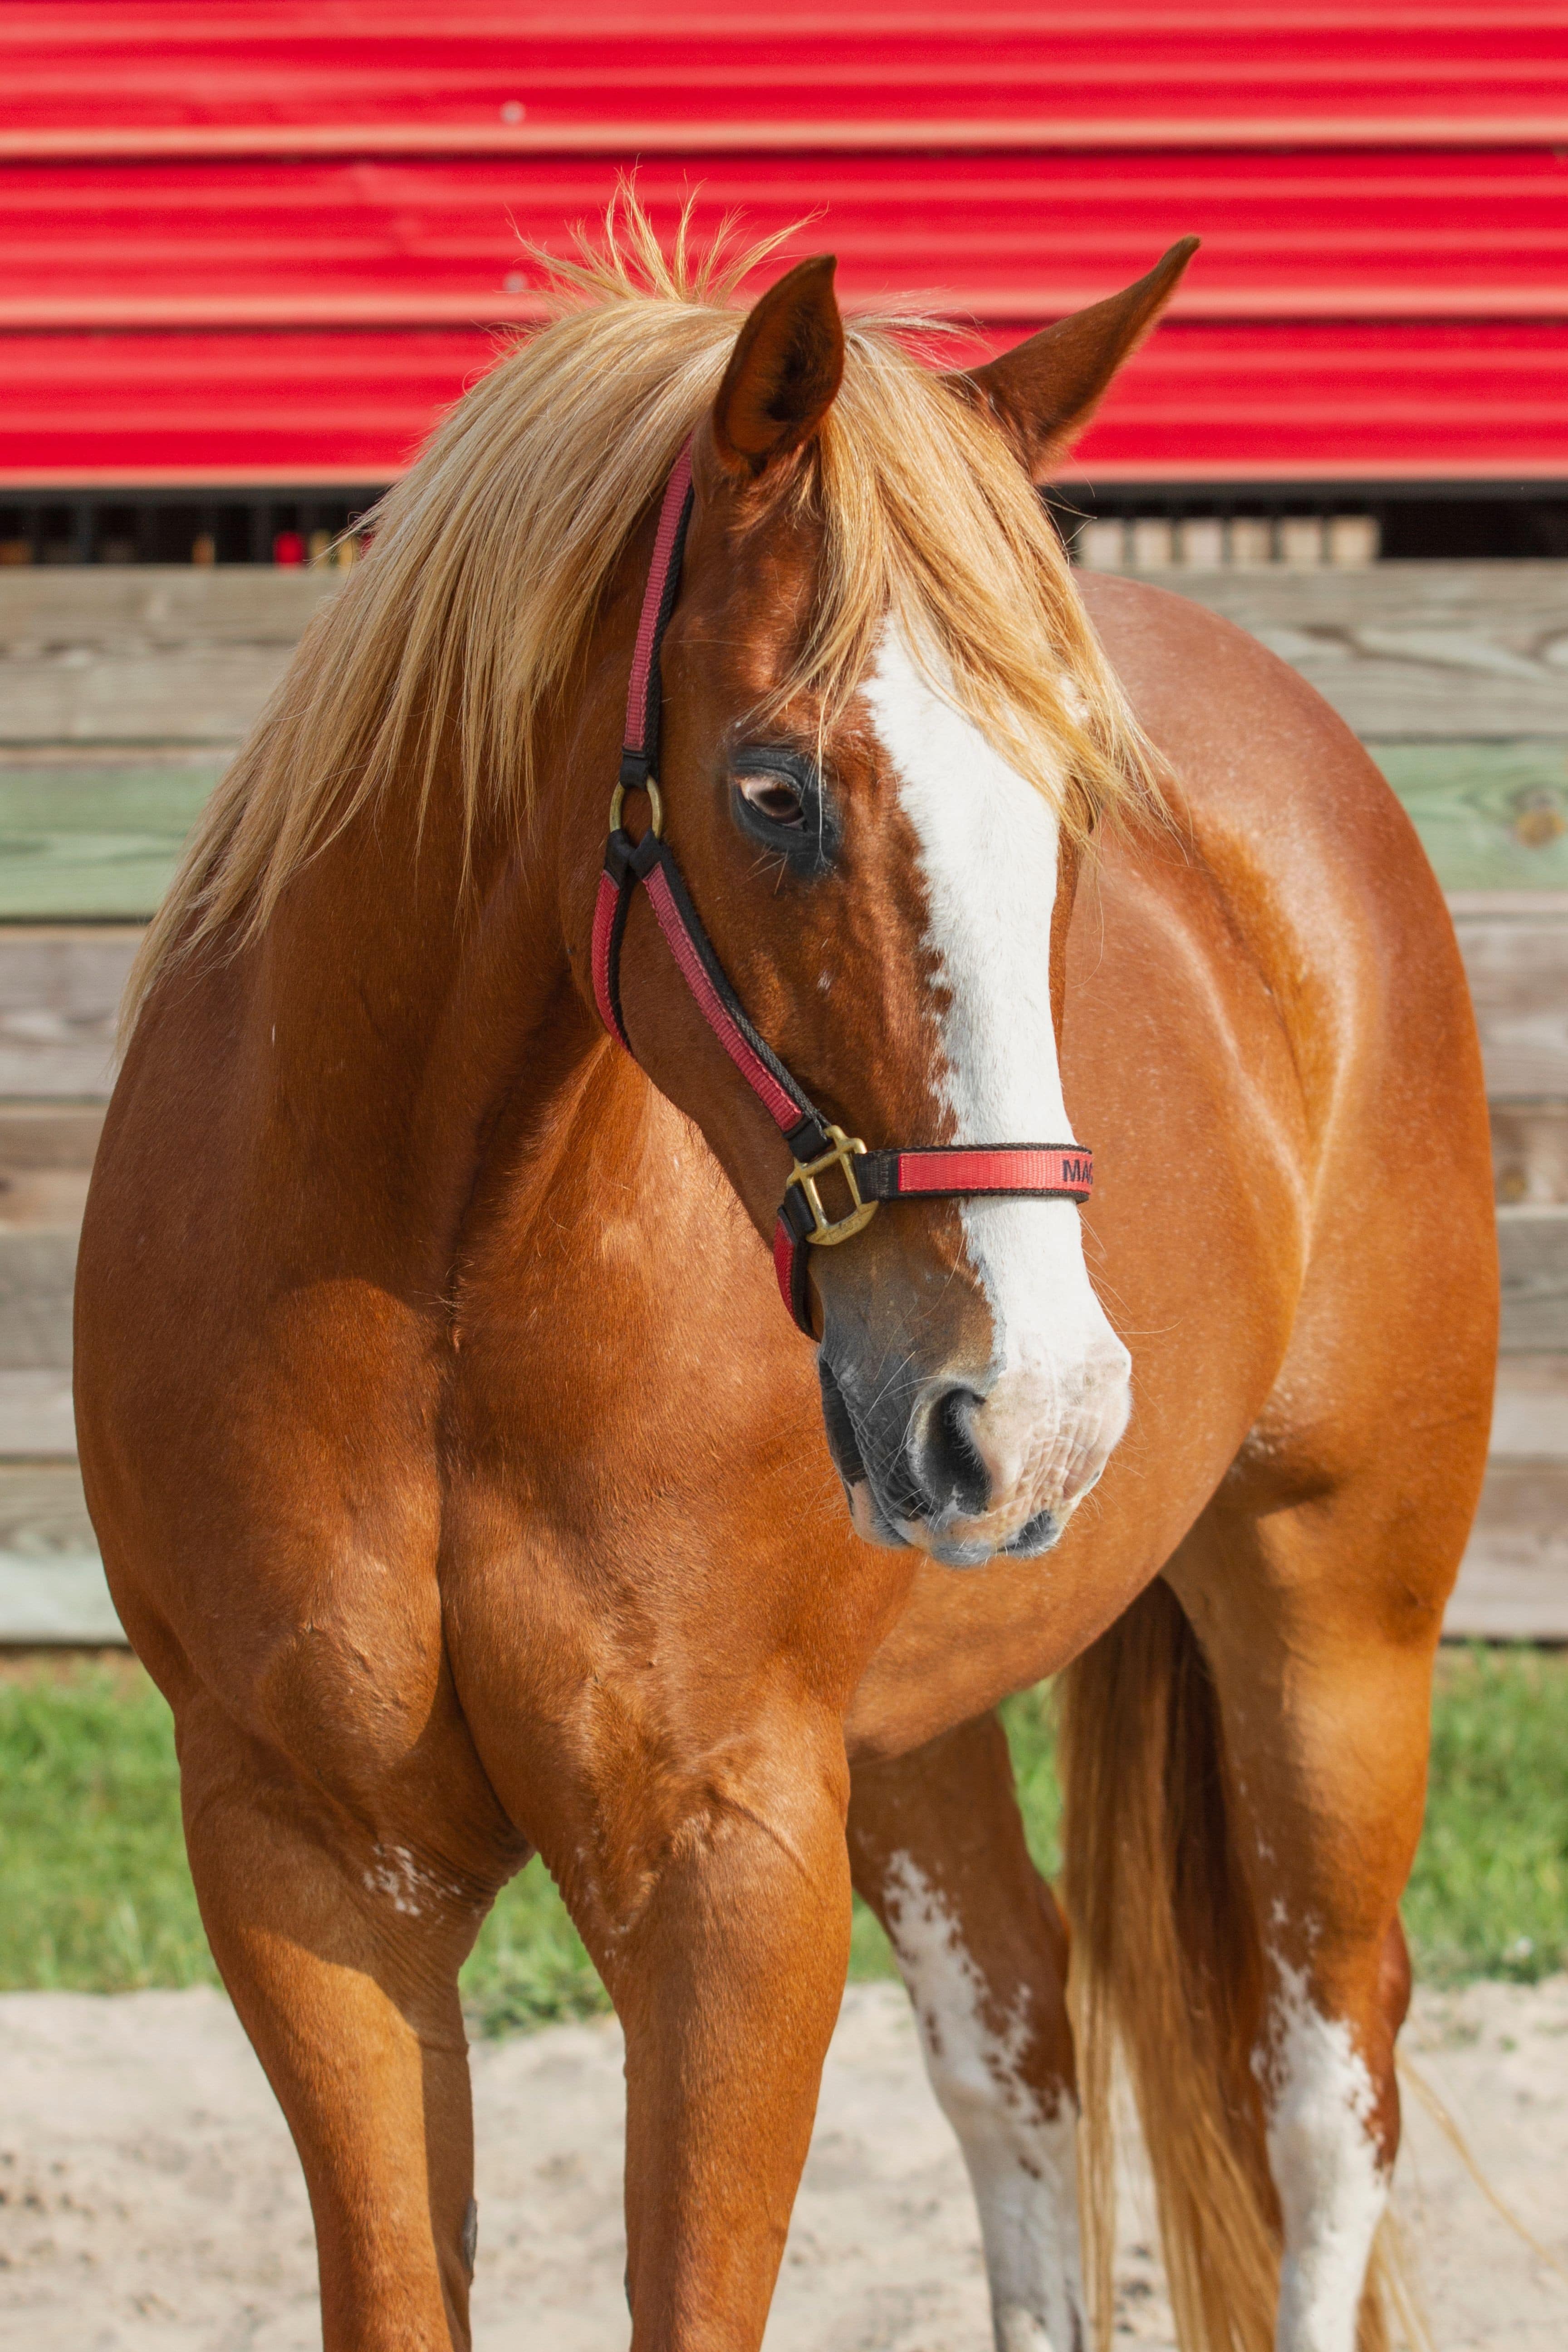 Mac is a lesson horse at J & S Performance Horses. He is a sorrel gelding with a blaze and flaxen mane, wearing a red and black halter with his name on it.